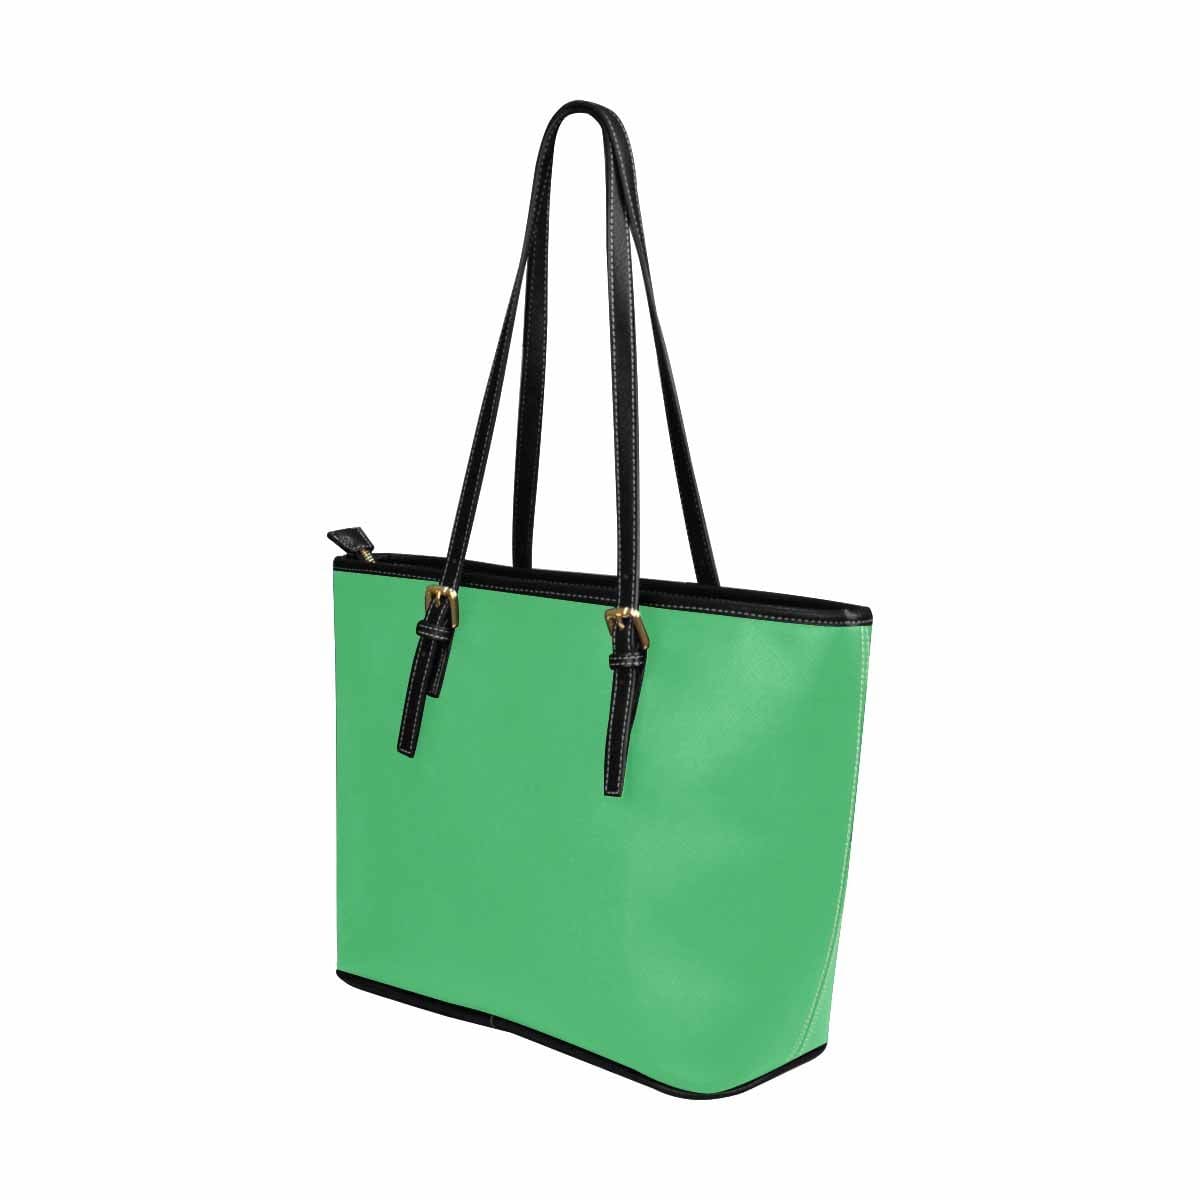 Large Leather Tote Shoulder Bag - Emerald Green - Bags | Leather Tote Bags